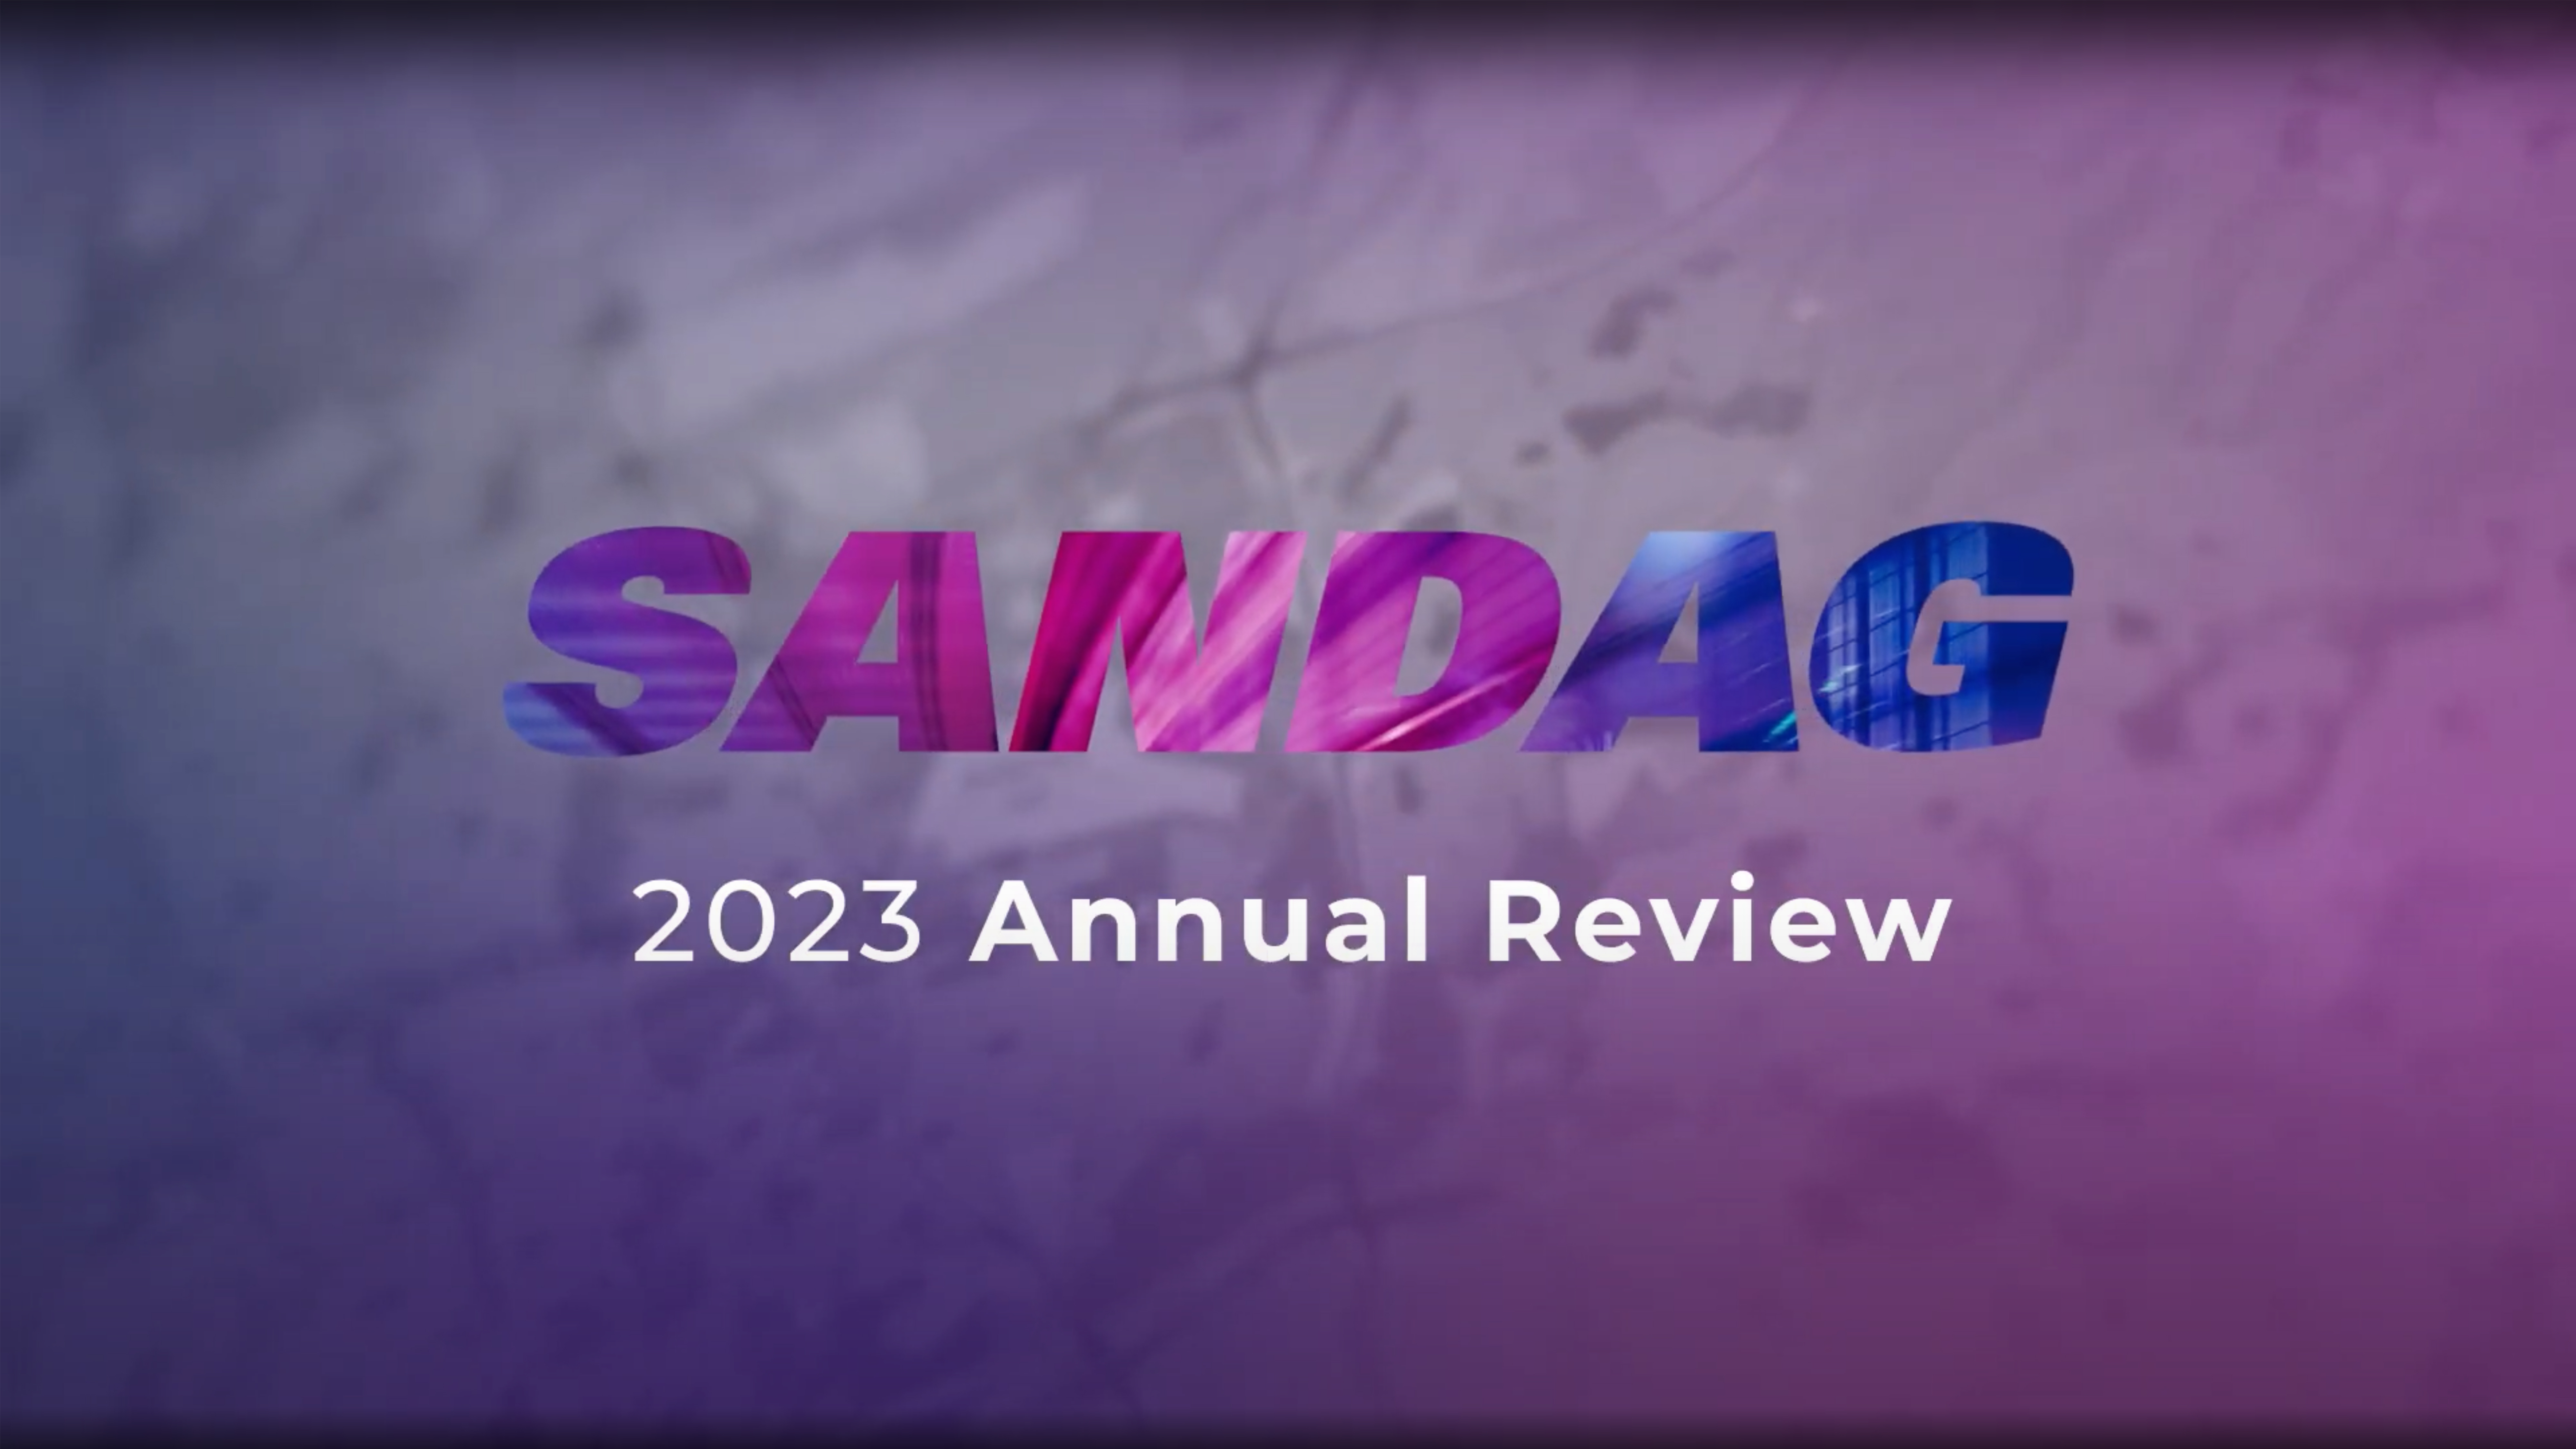 SANDAG 2023 Annual Review video